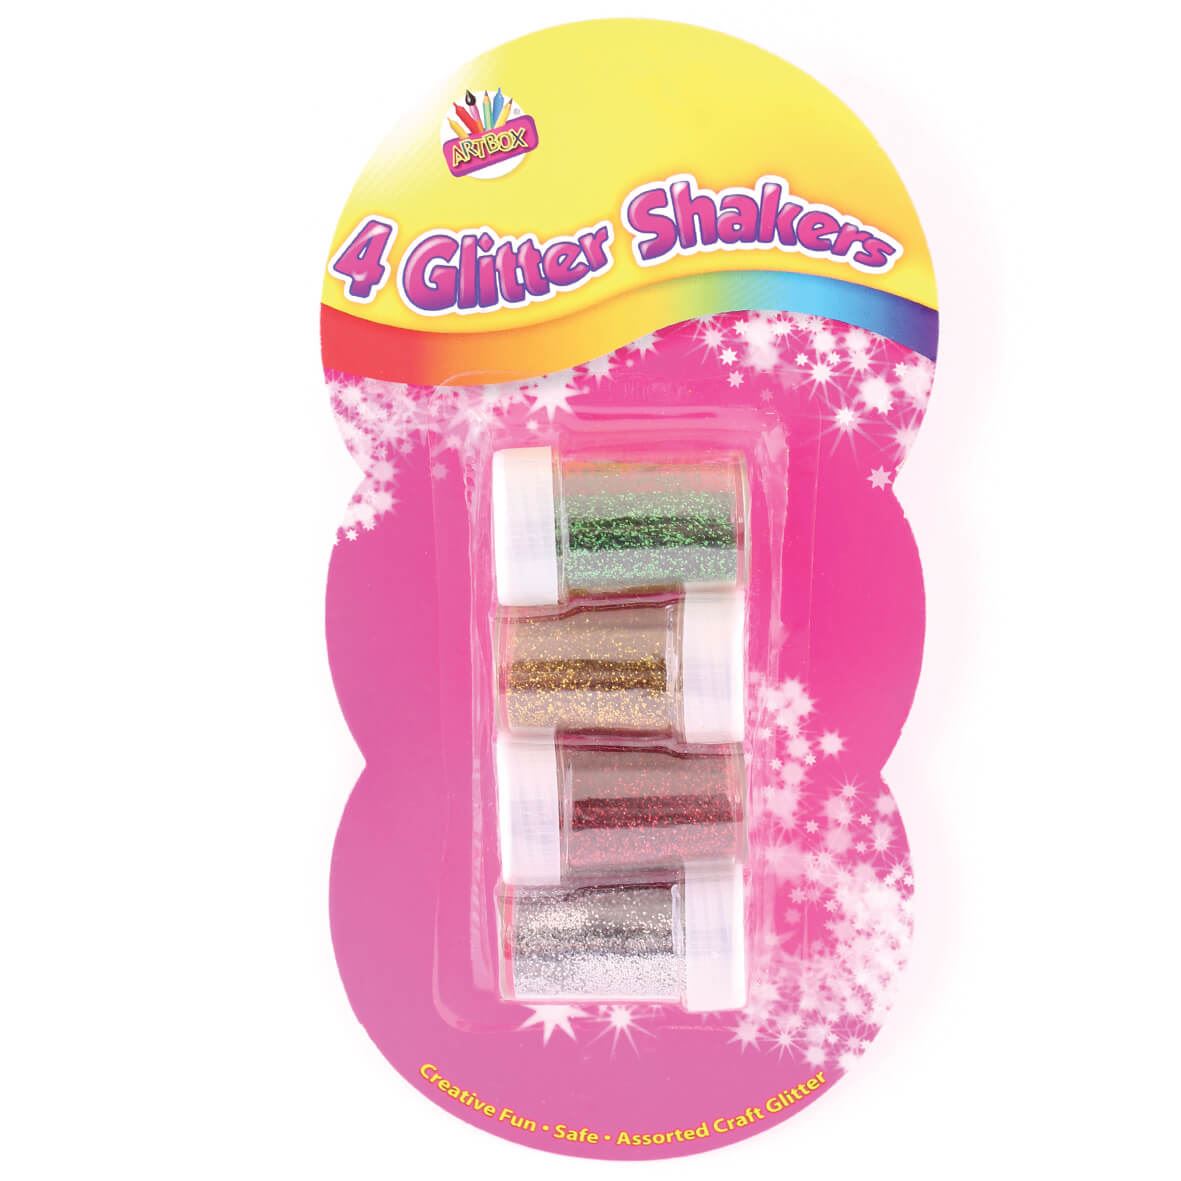 Children's Pack of 4 Assorted Colour 16g Glitter Shakers for Crafting